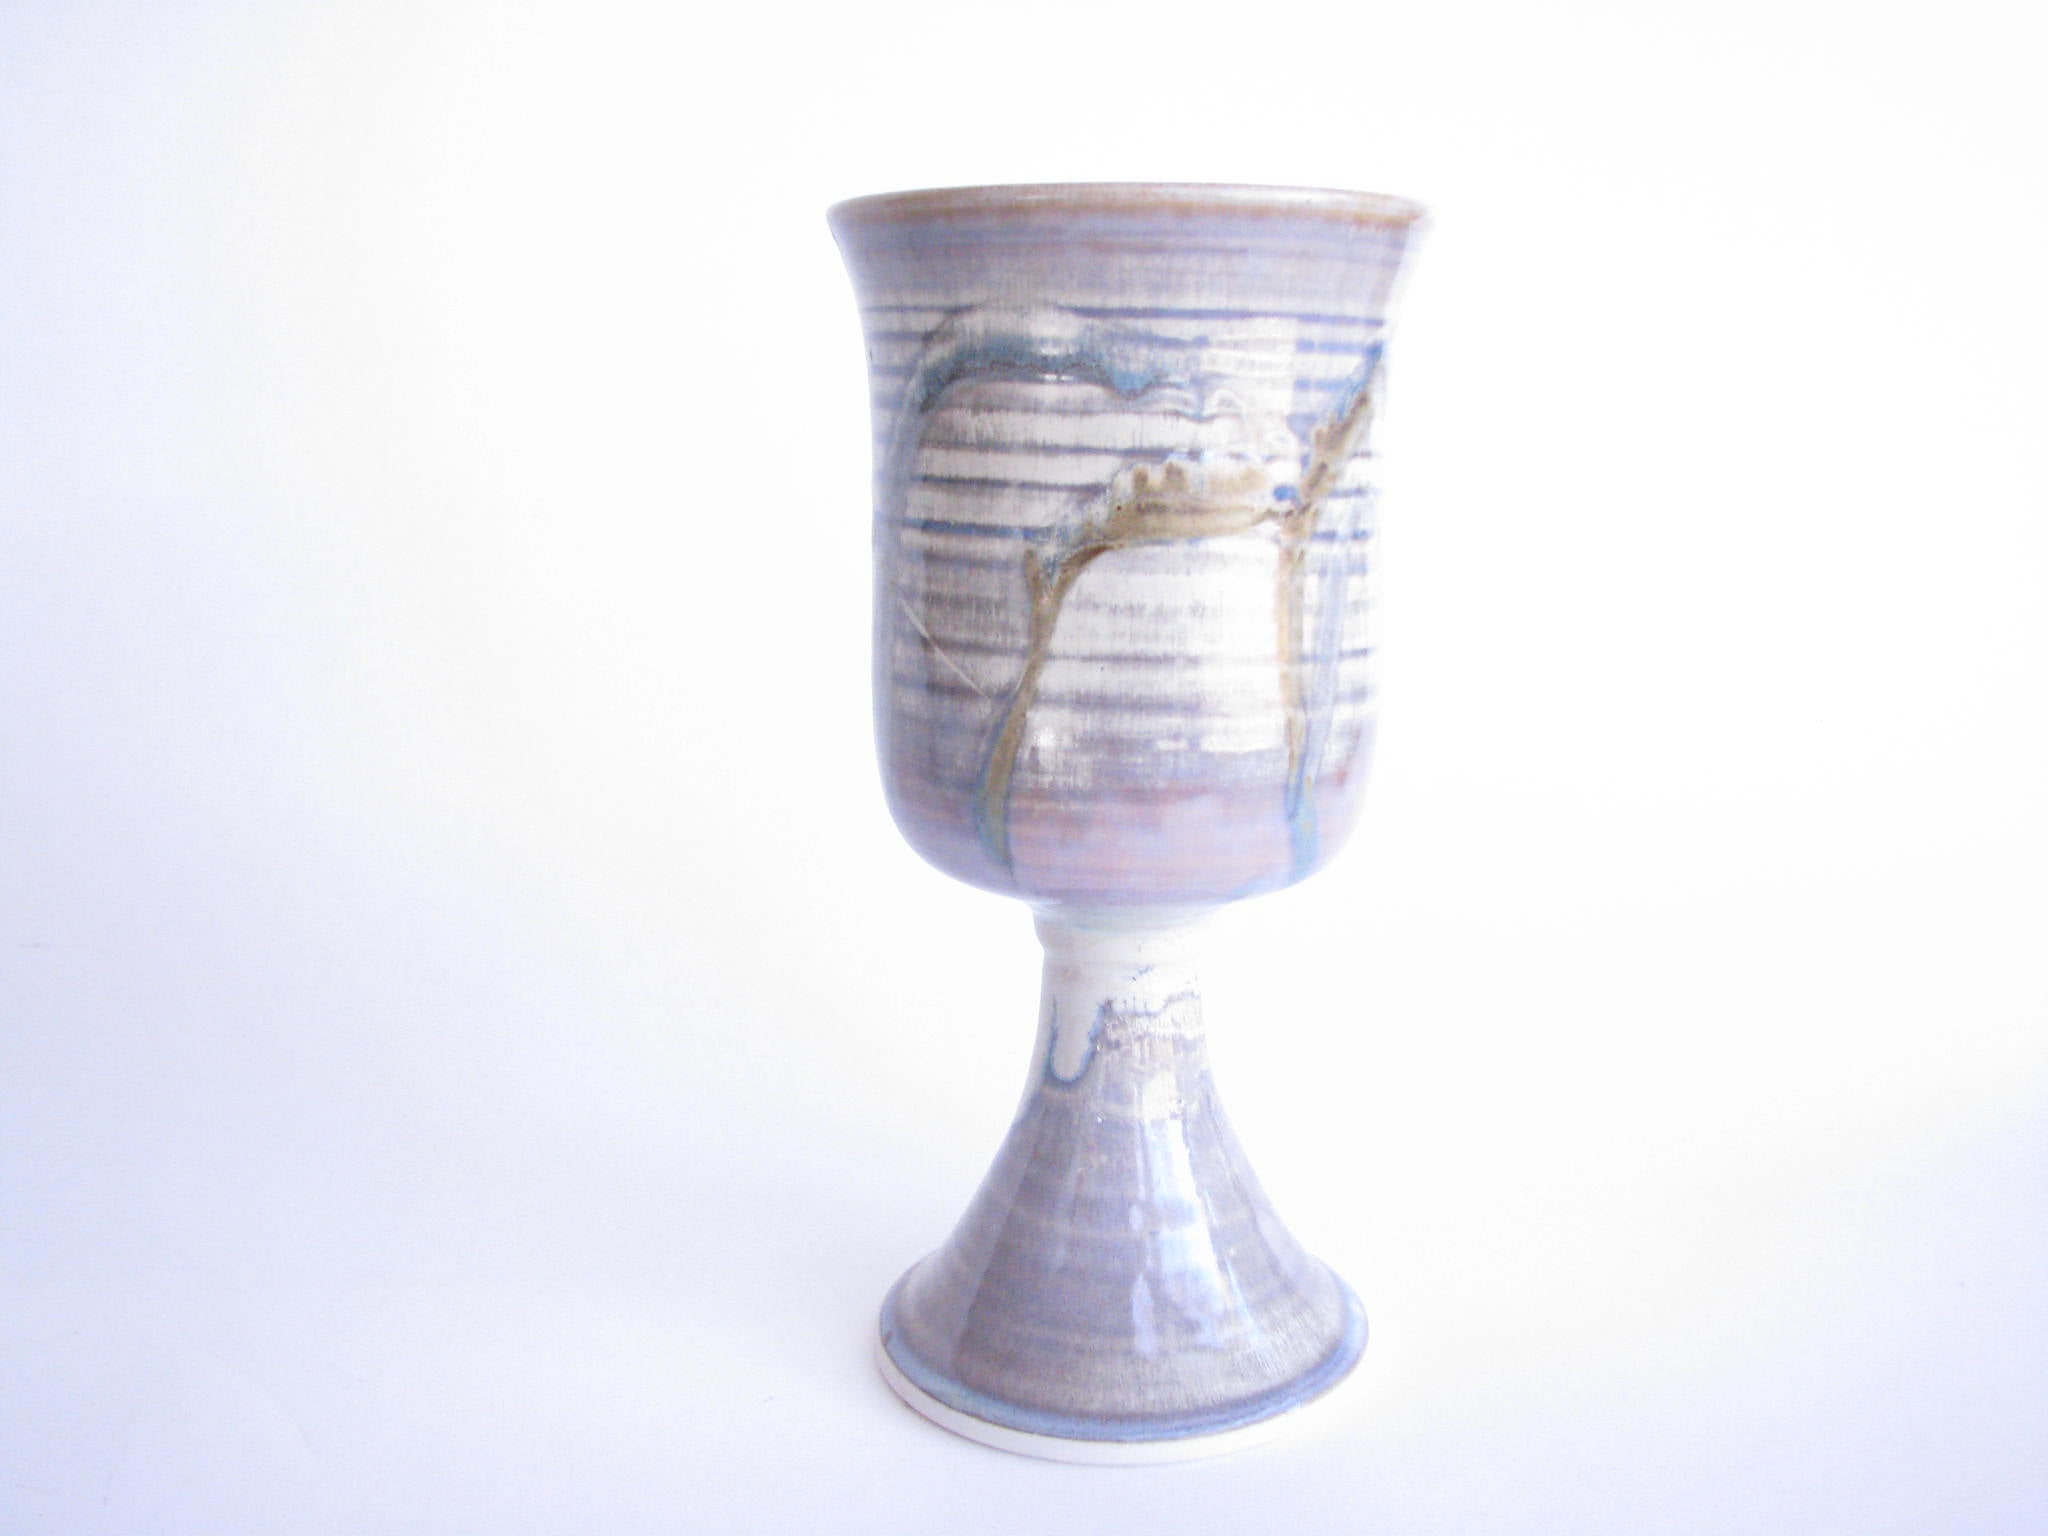 edgebrookhouse - Vintage Art Pottery Footed Vase or Chalice with Drip Glaze